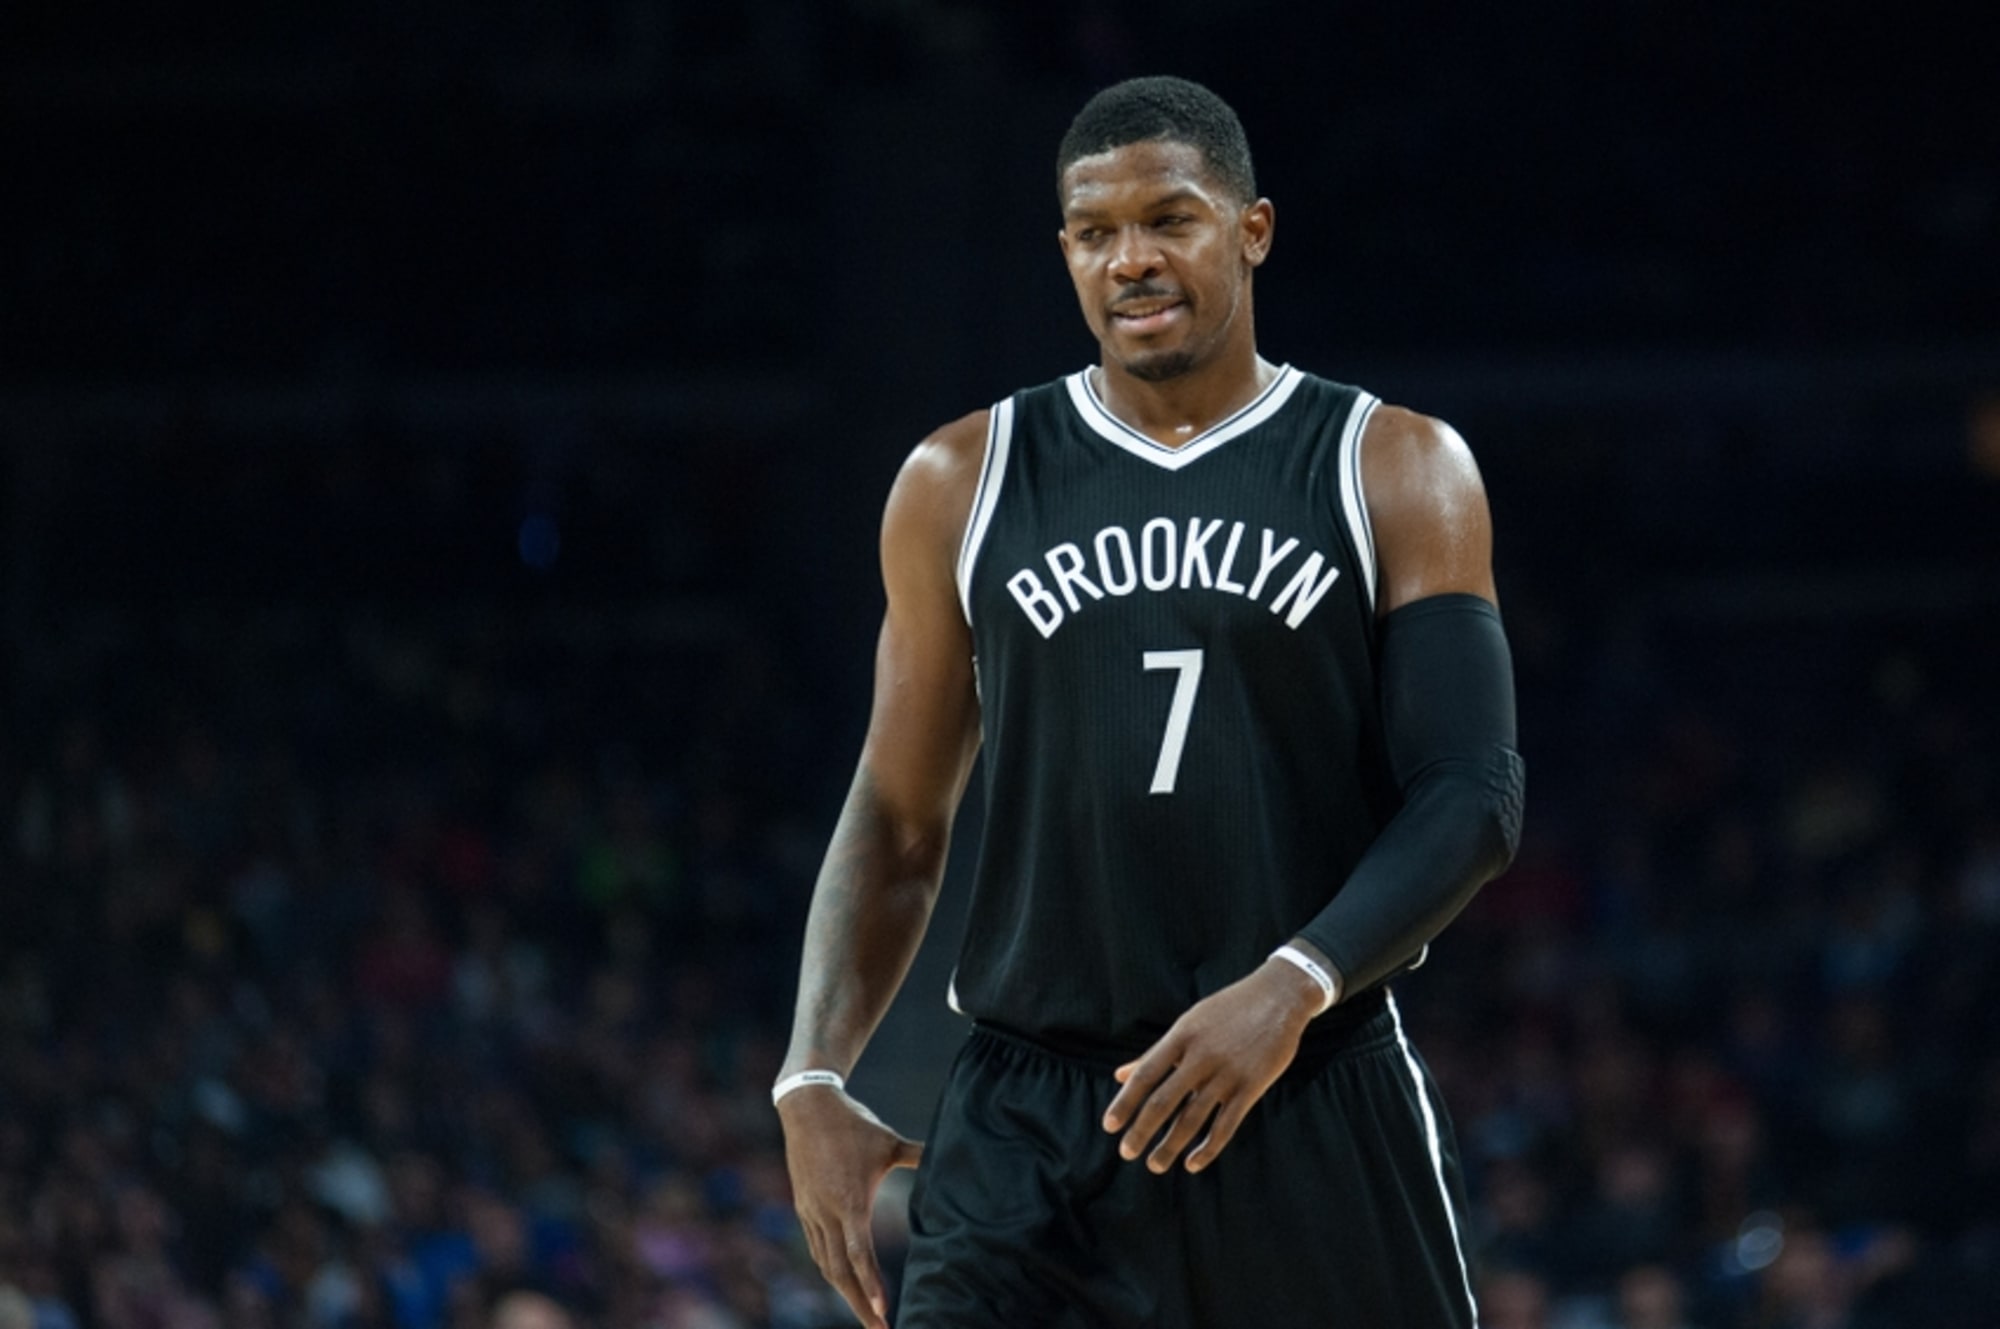 Joe Johnson Trade To Brooklyn Nets Completed, According To Report